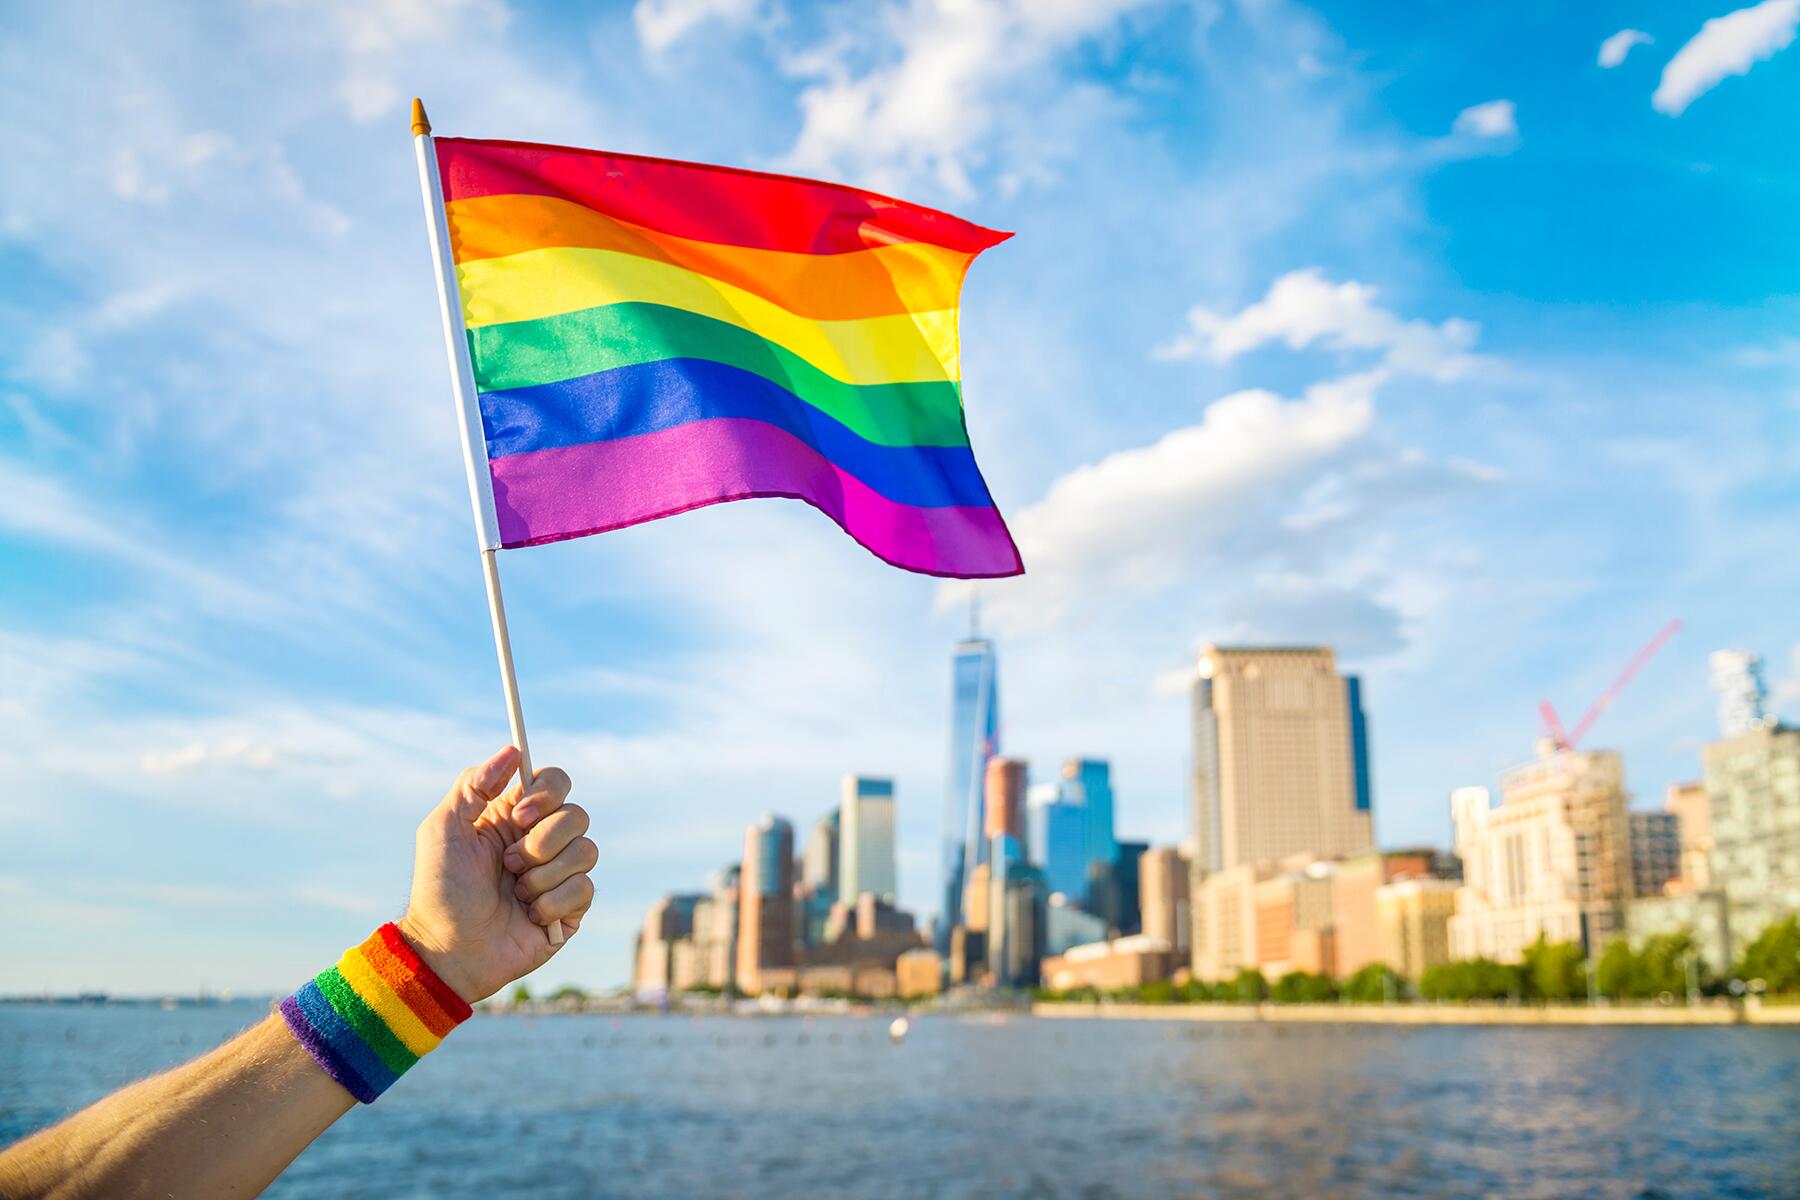 <a href='https://www.fodors.com/world/north-america/usa/new-york/new-york-city/experiences/news/photos/a-queer-guide-to-visiting-new-york-city#'>From &quot;The Ultimate LGBTQ+ Guide to Visiting New York City&quot;</a>